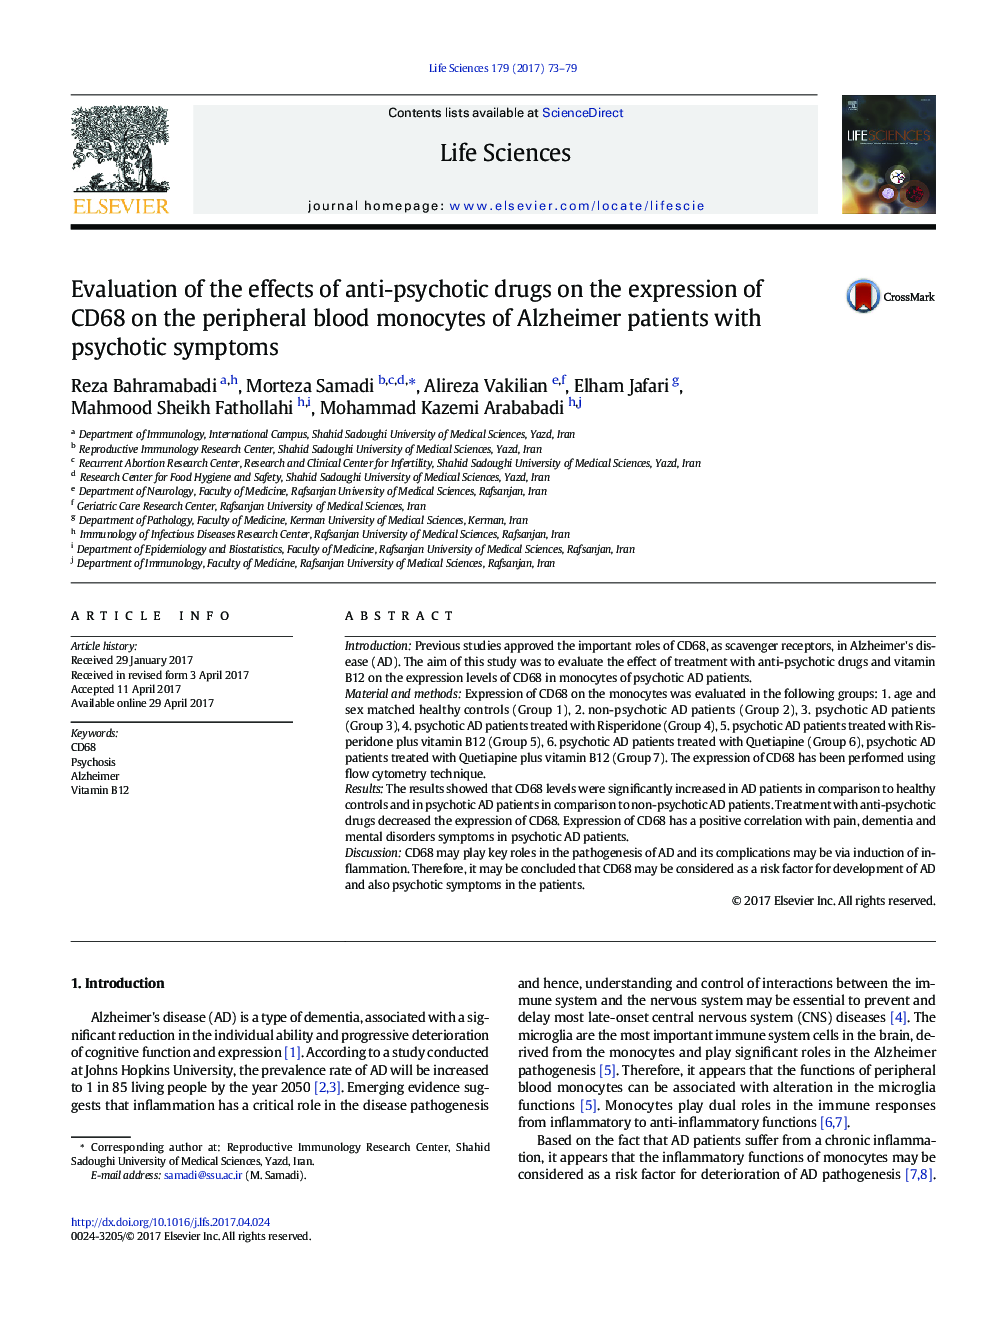 Evaluation of the effects of anti-psychotic drugs on the expression of CD68 on the peripheral blood monocytes of Alzheimer patients with psychotic symptoms